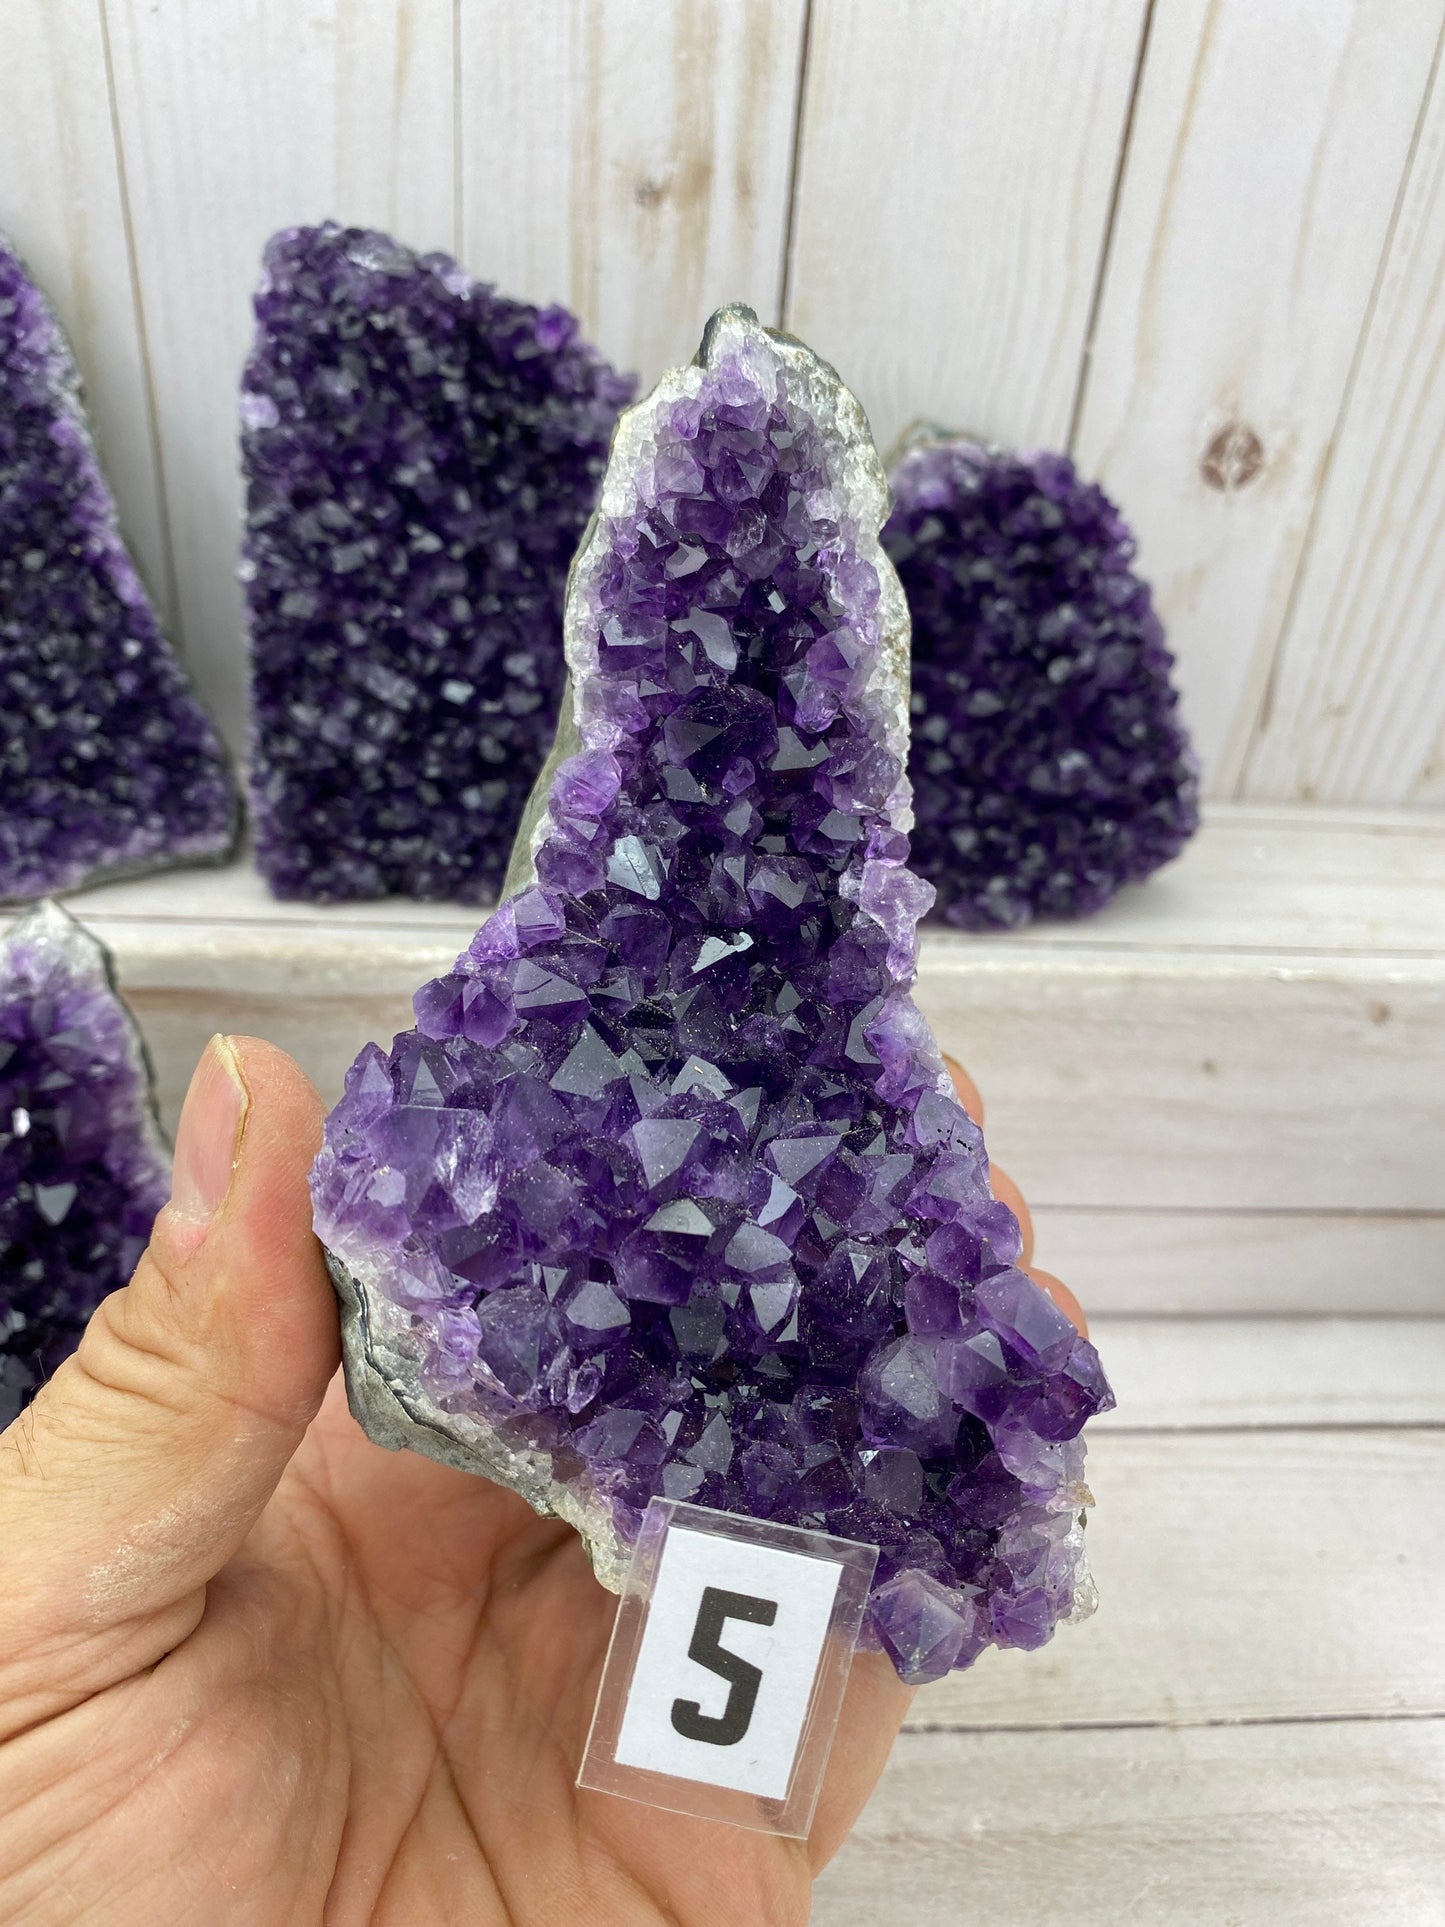 Extra Quality Amethyst cluster 450-700g (~1.0-1.5 lb), YOU PICK